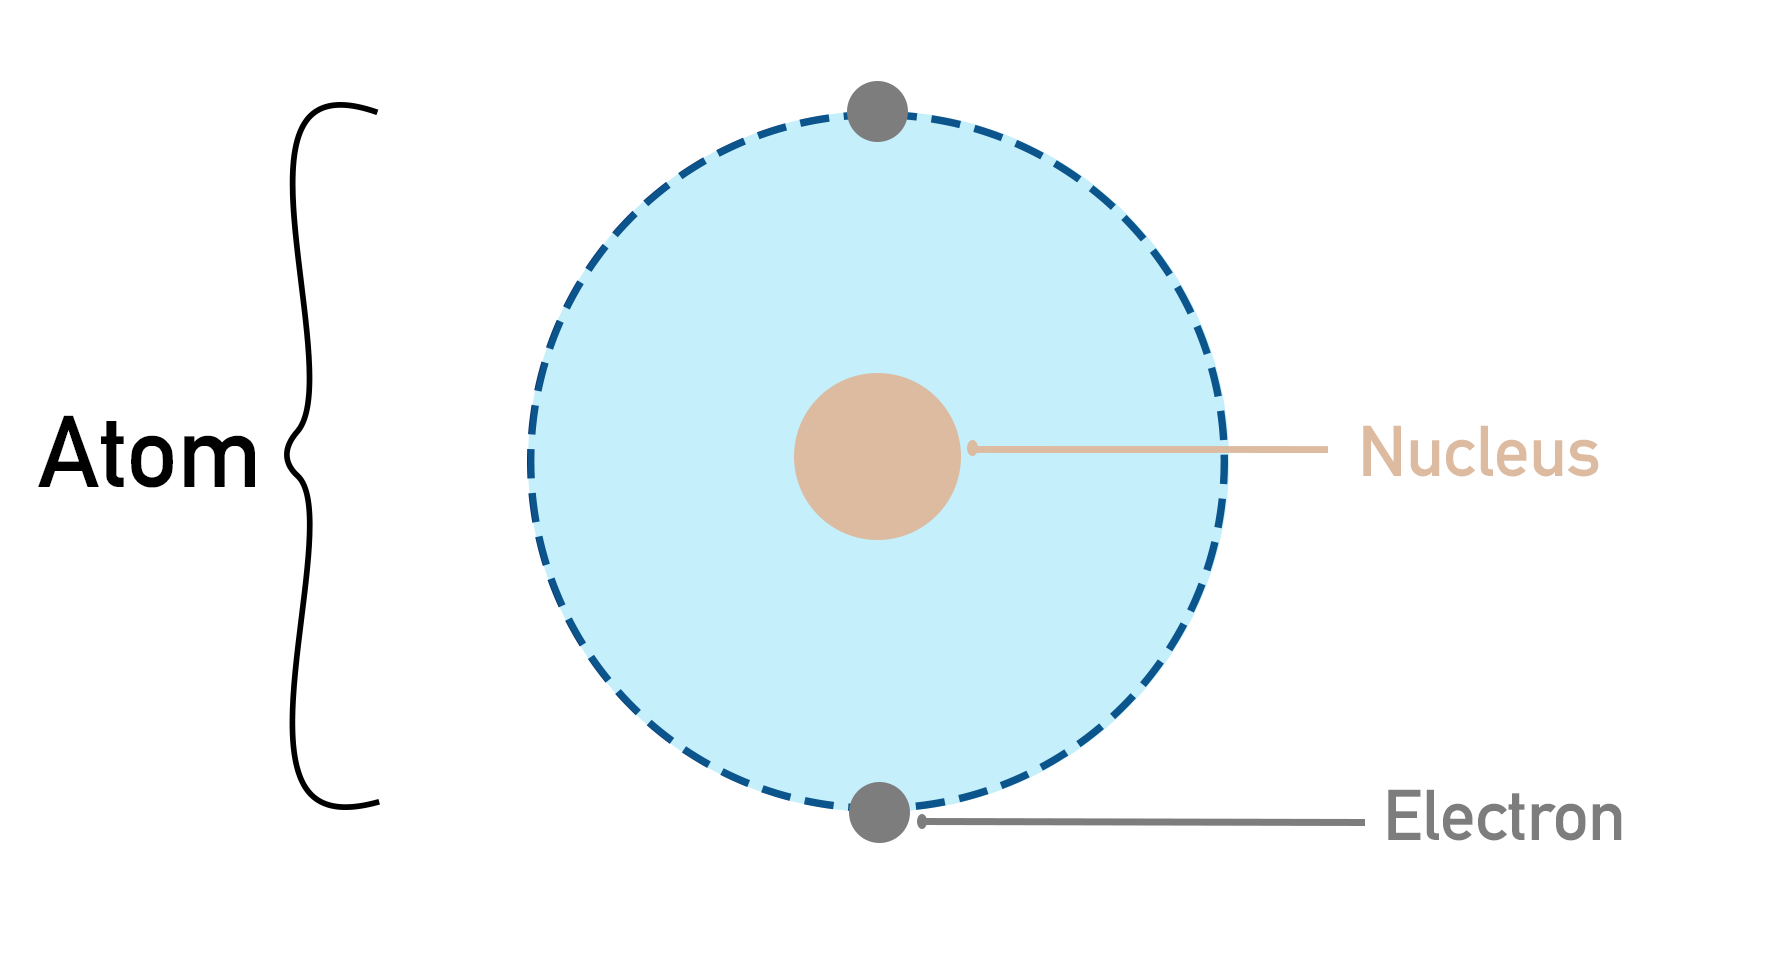 nuclear model of an atom, showing nucleus and electrons